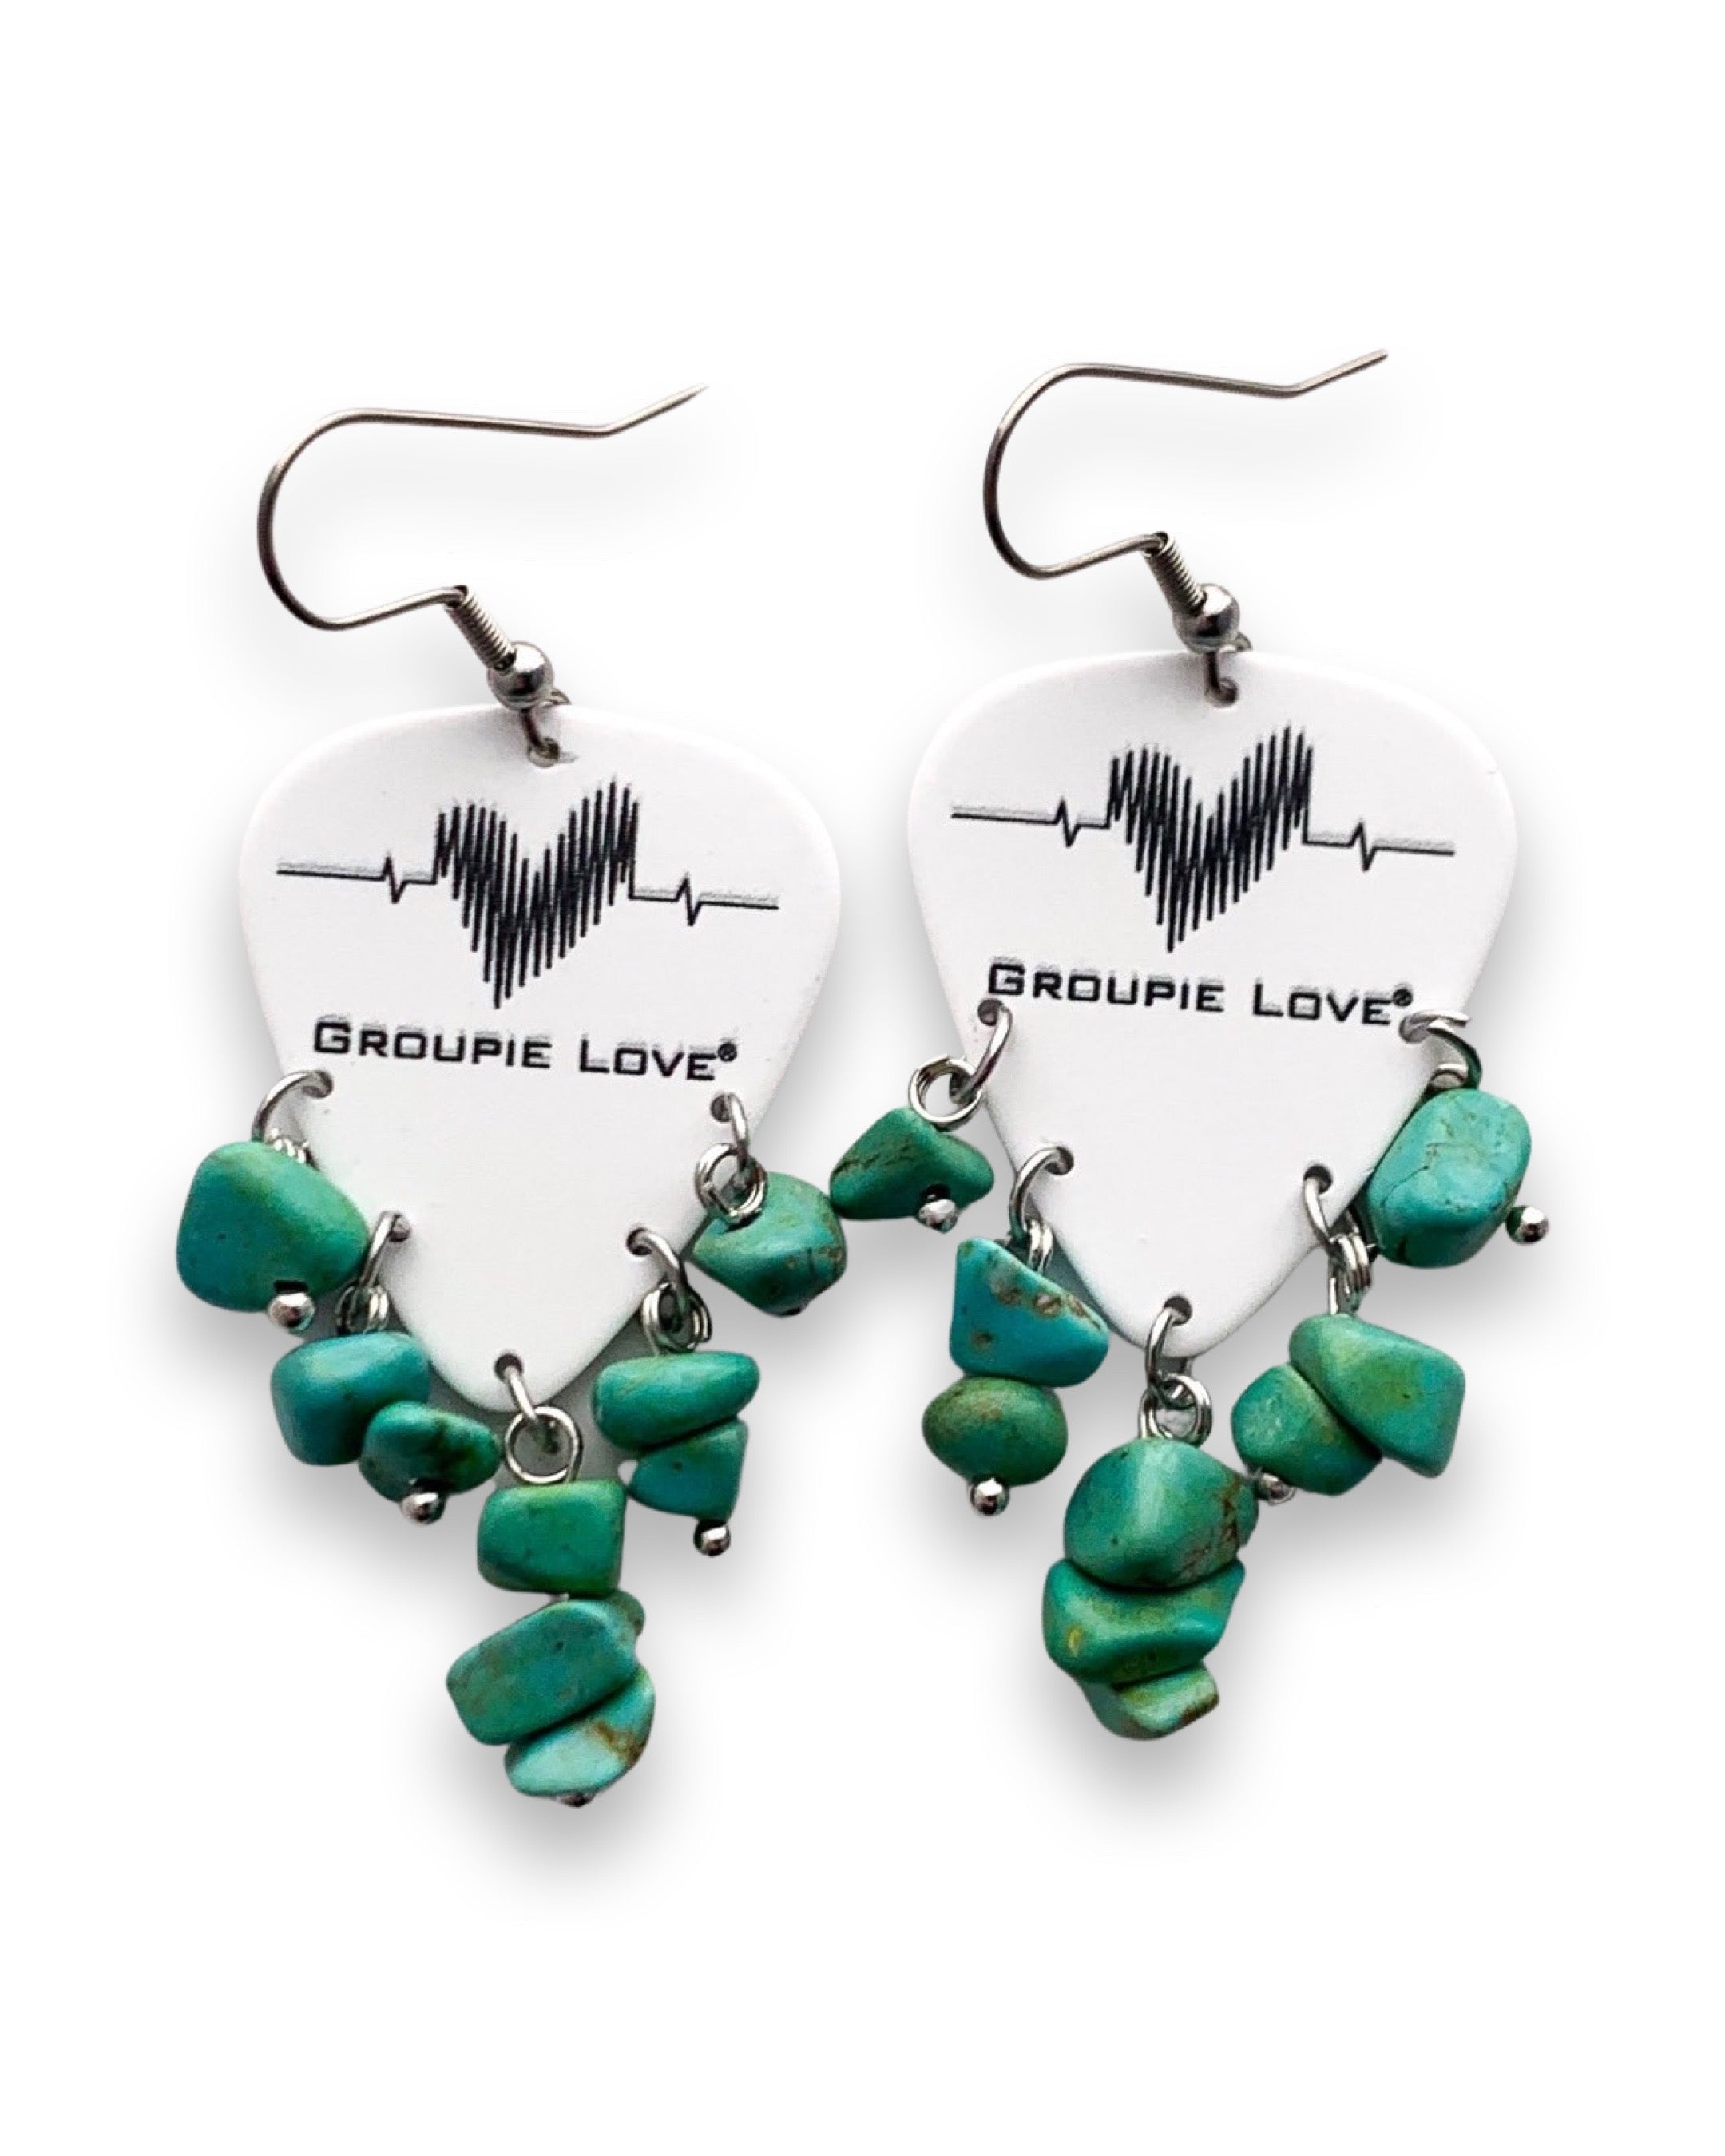 Groupie Love Classic Turquoise Guitar Pick Earrings